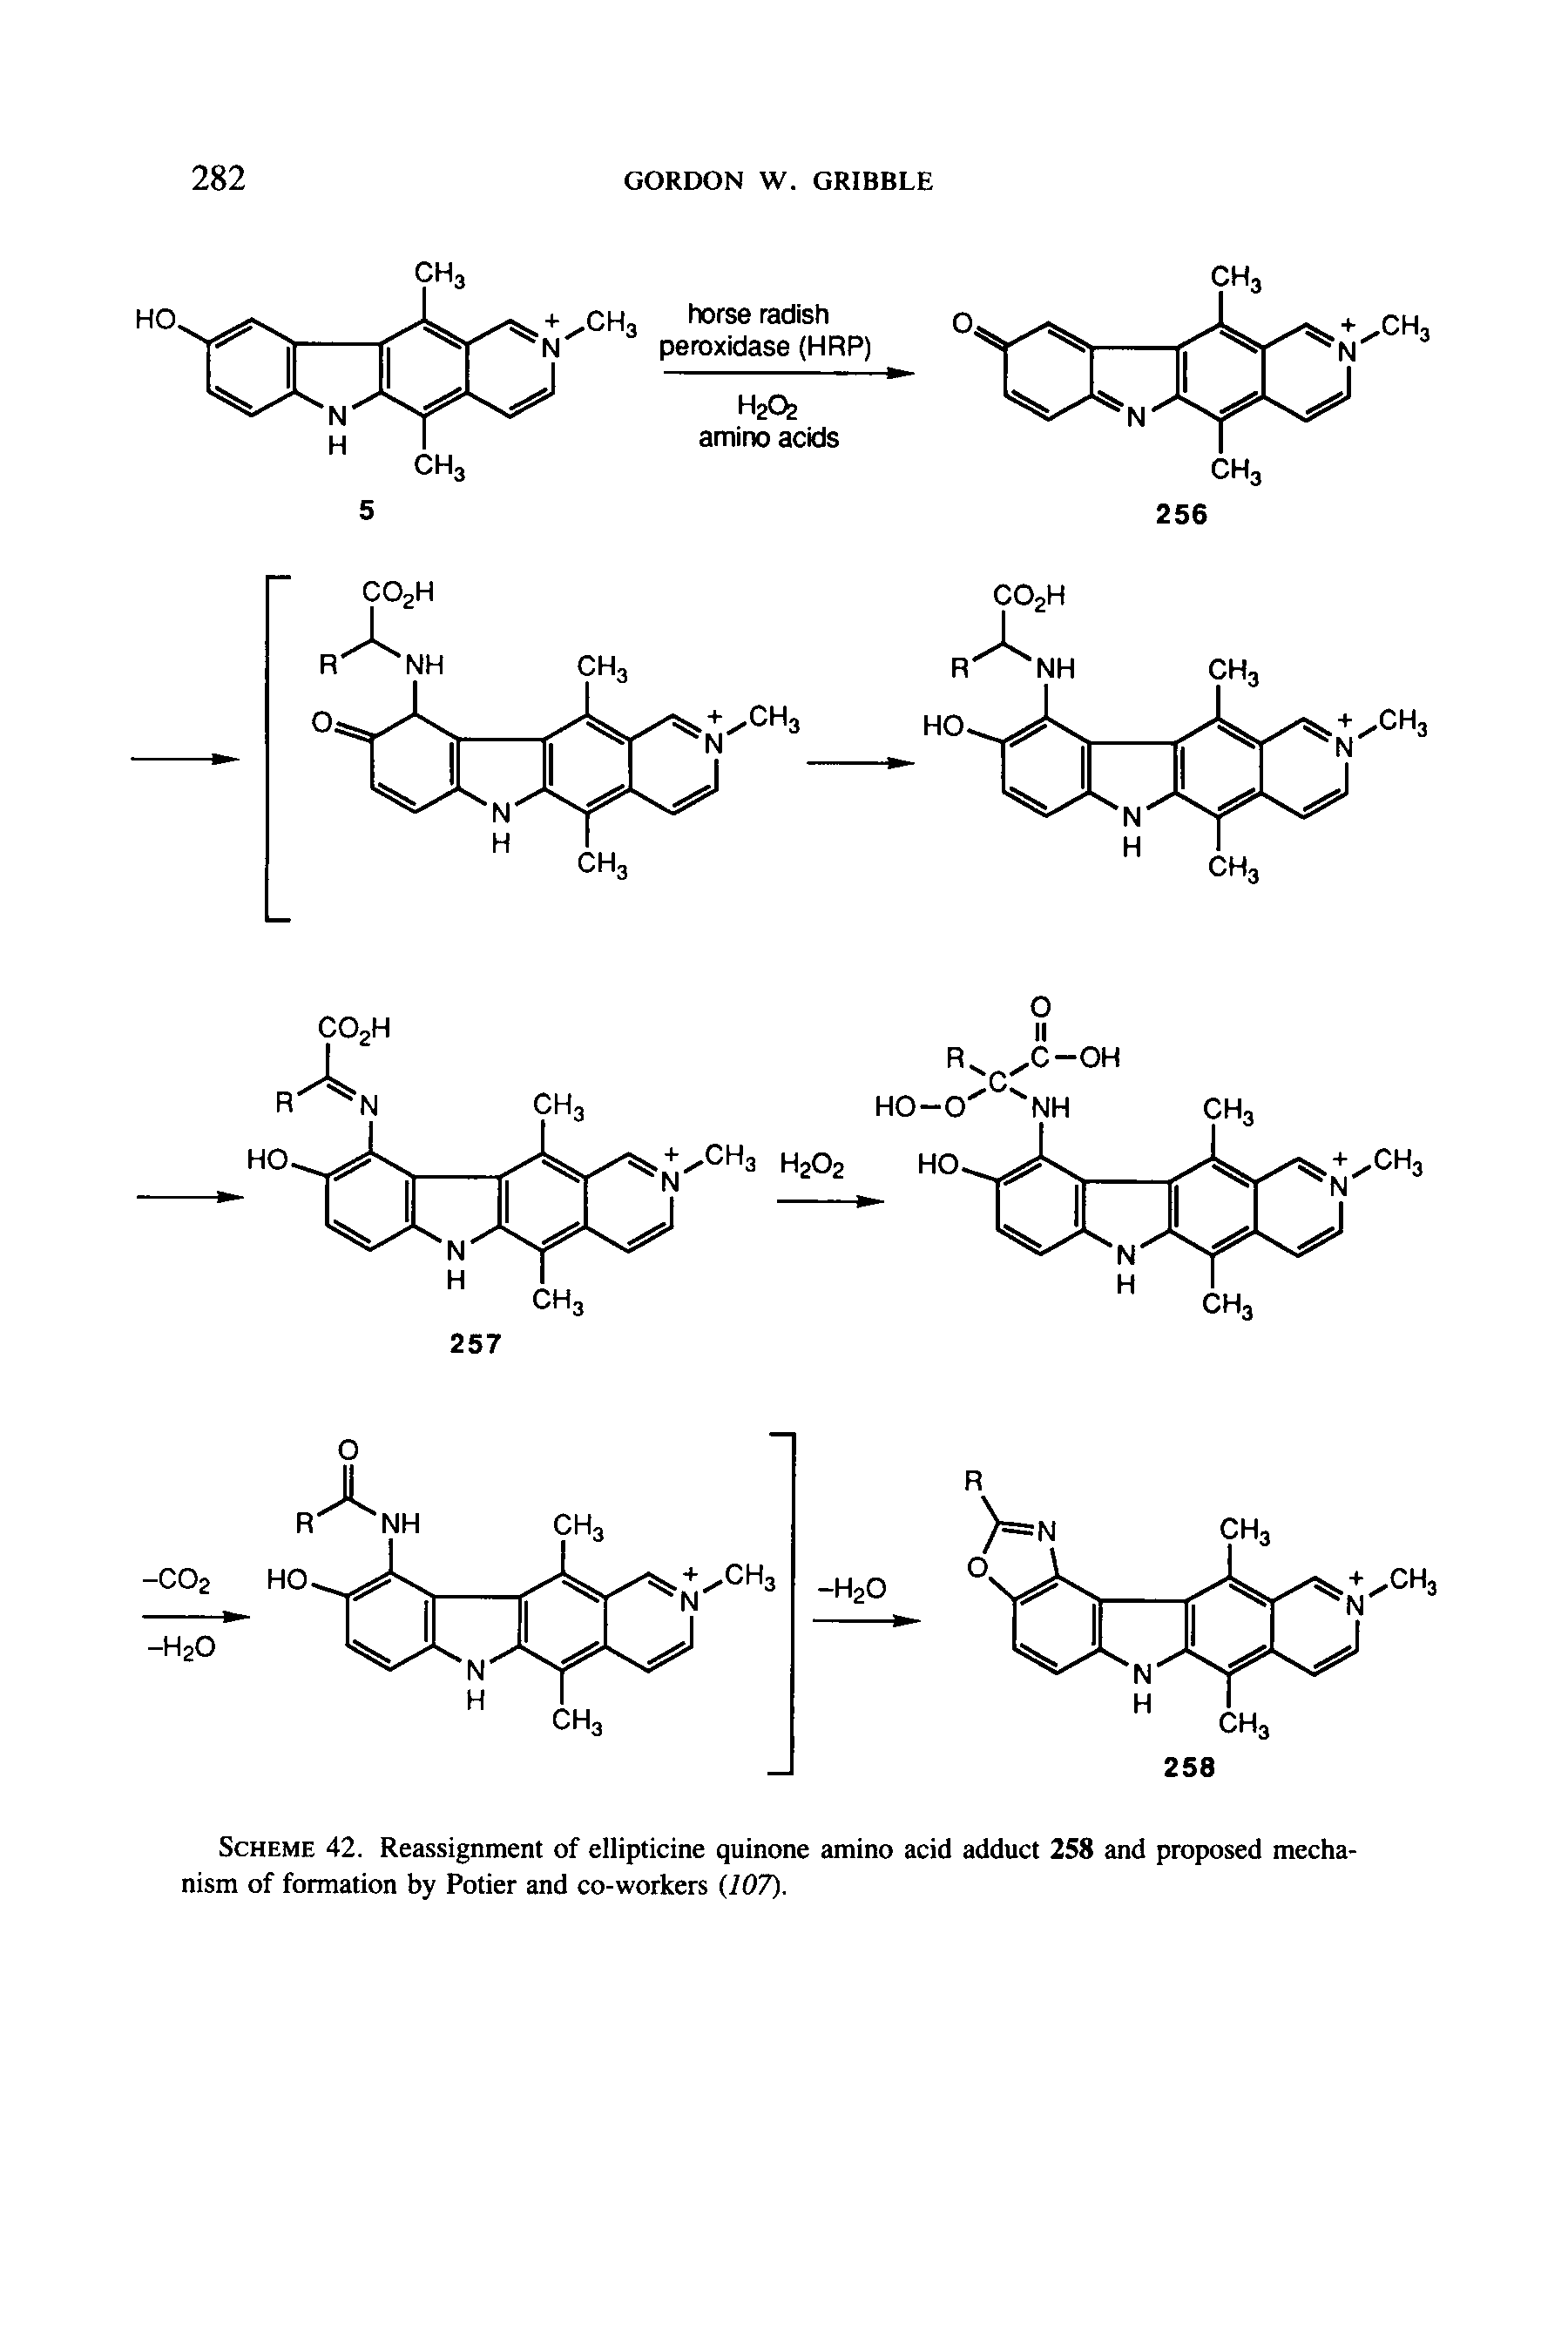 Scheme 42. Reassignment of ellipticine quinone amino acid adduct 258 and proposed mechanism of formation by Potier and co-workers (107).